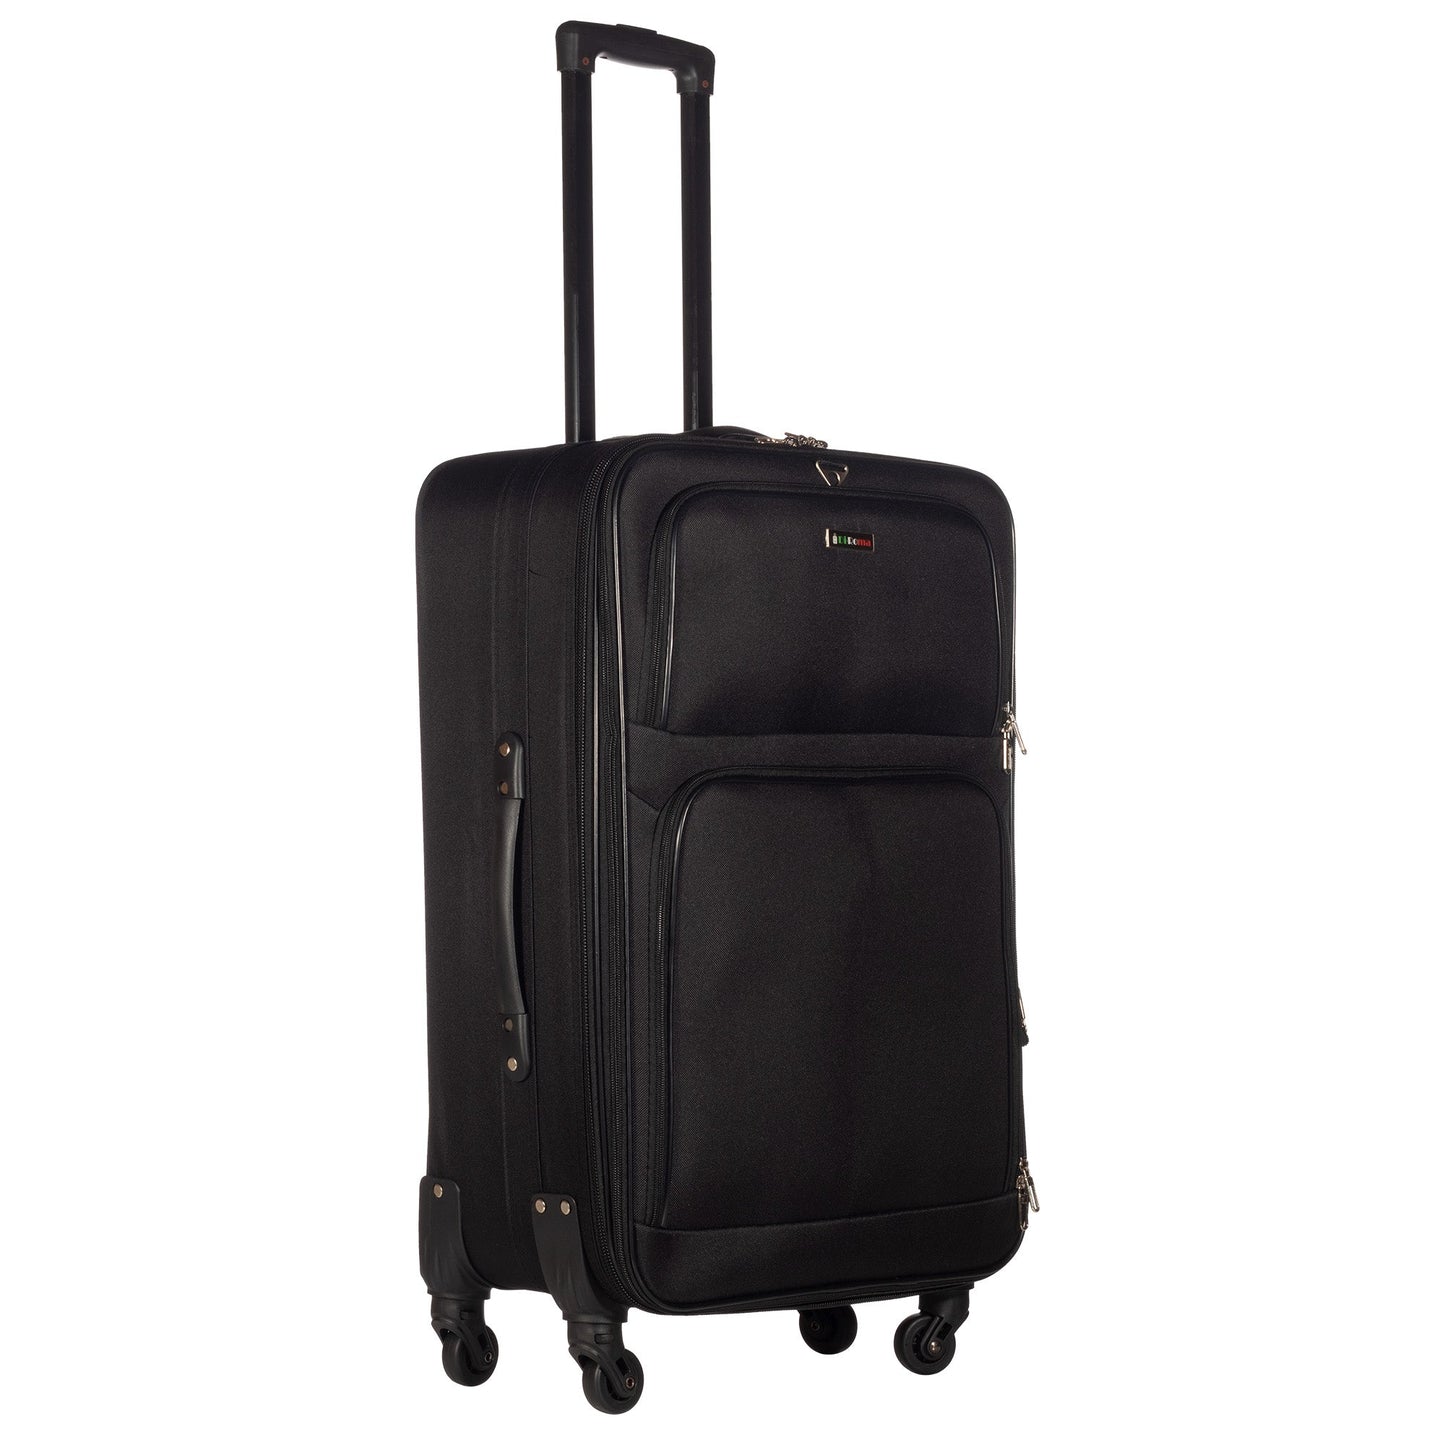 Identity collection black luggage (20/26/28/30") Suitcase Lock Spinner